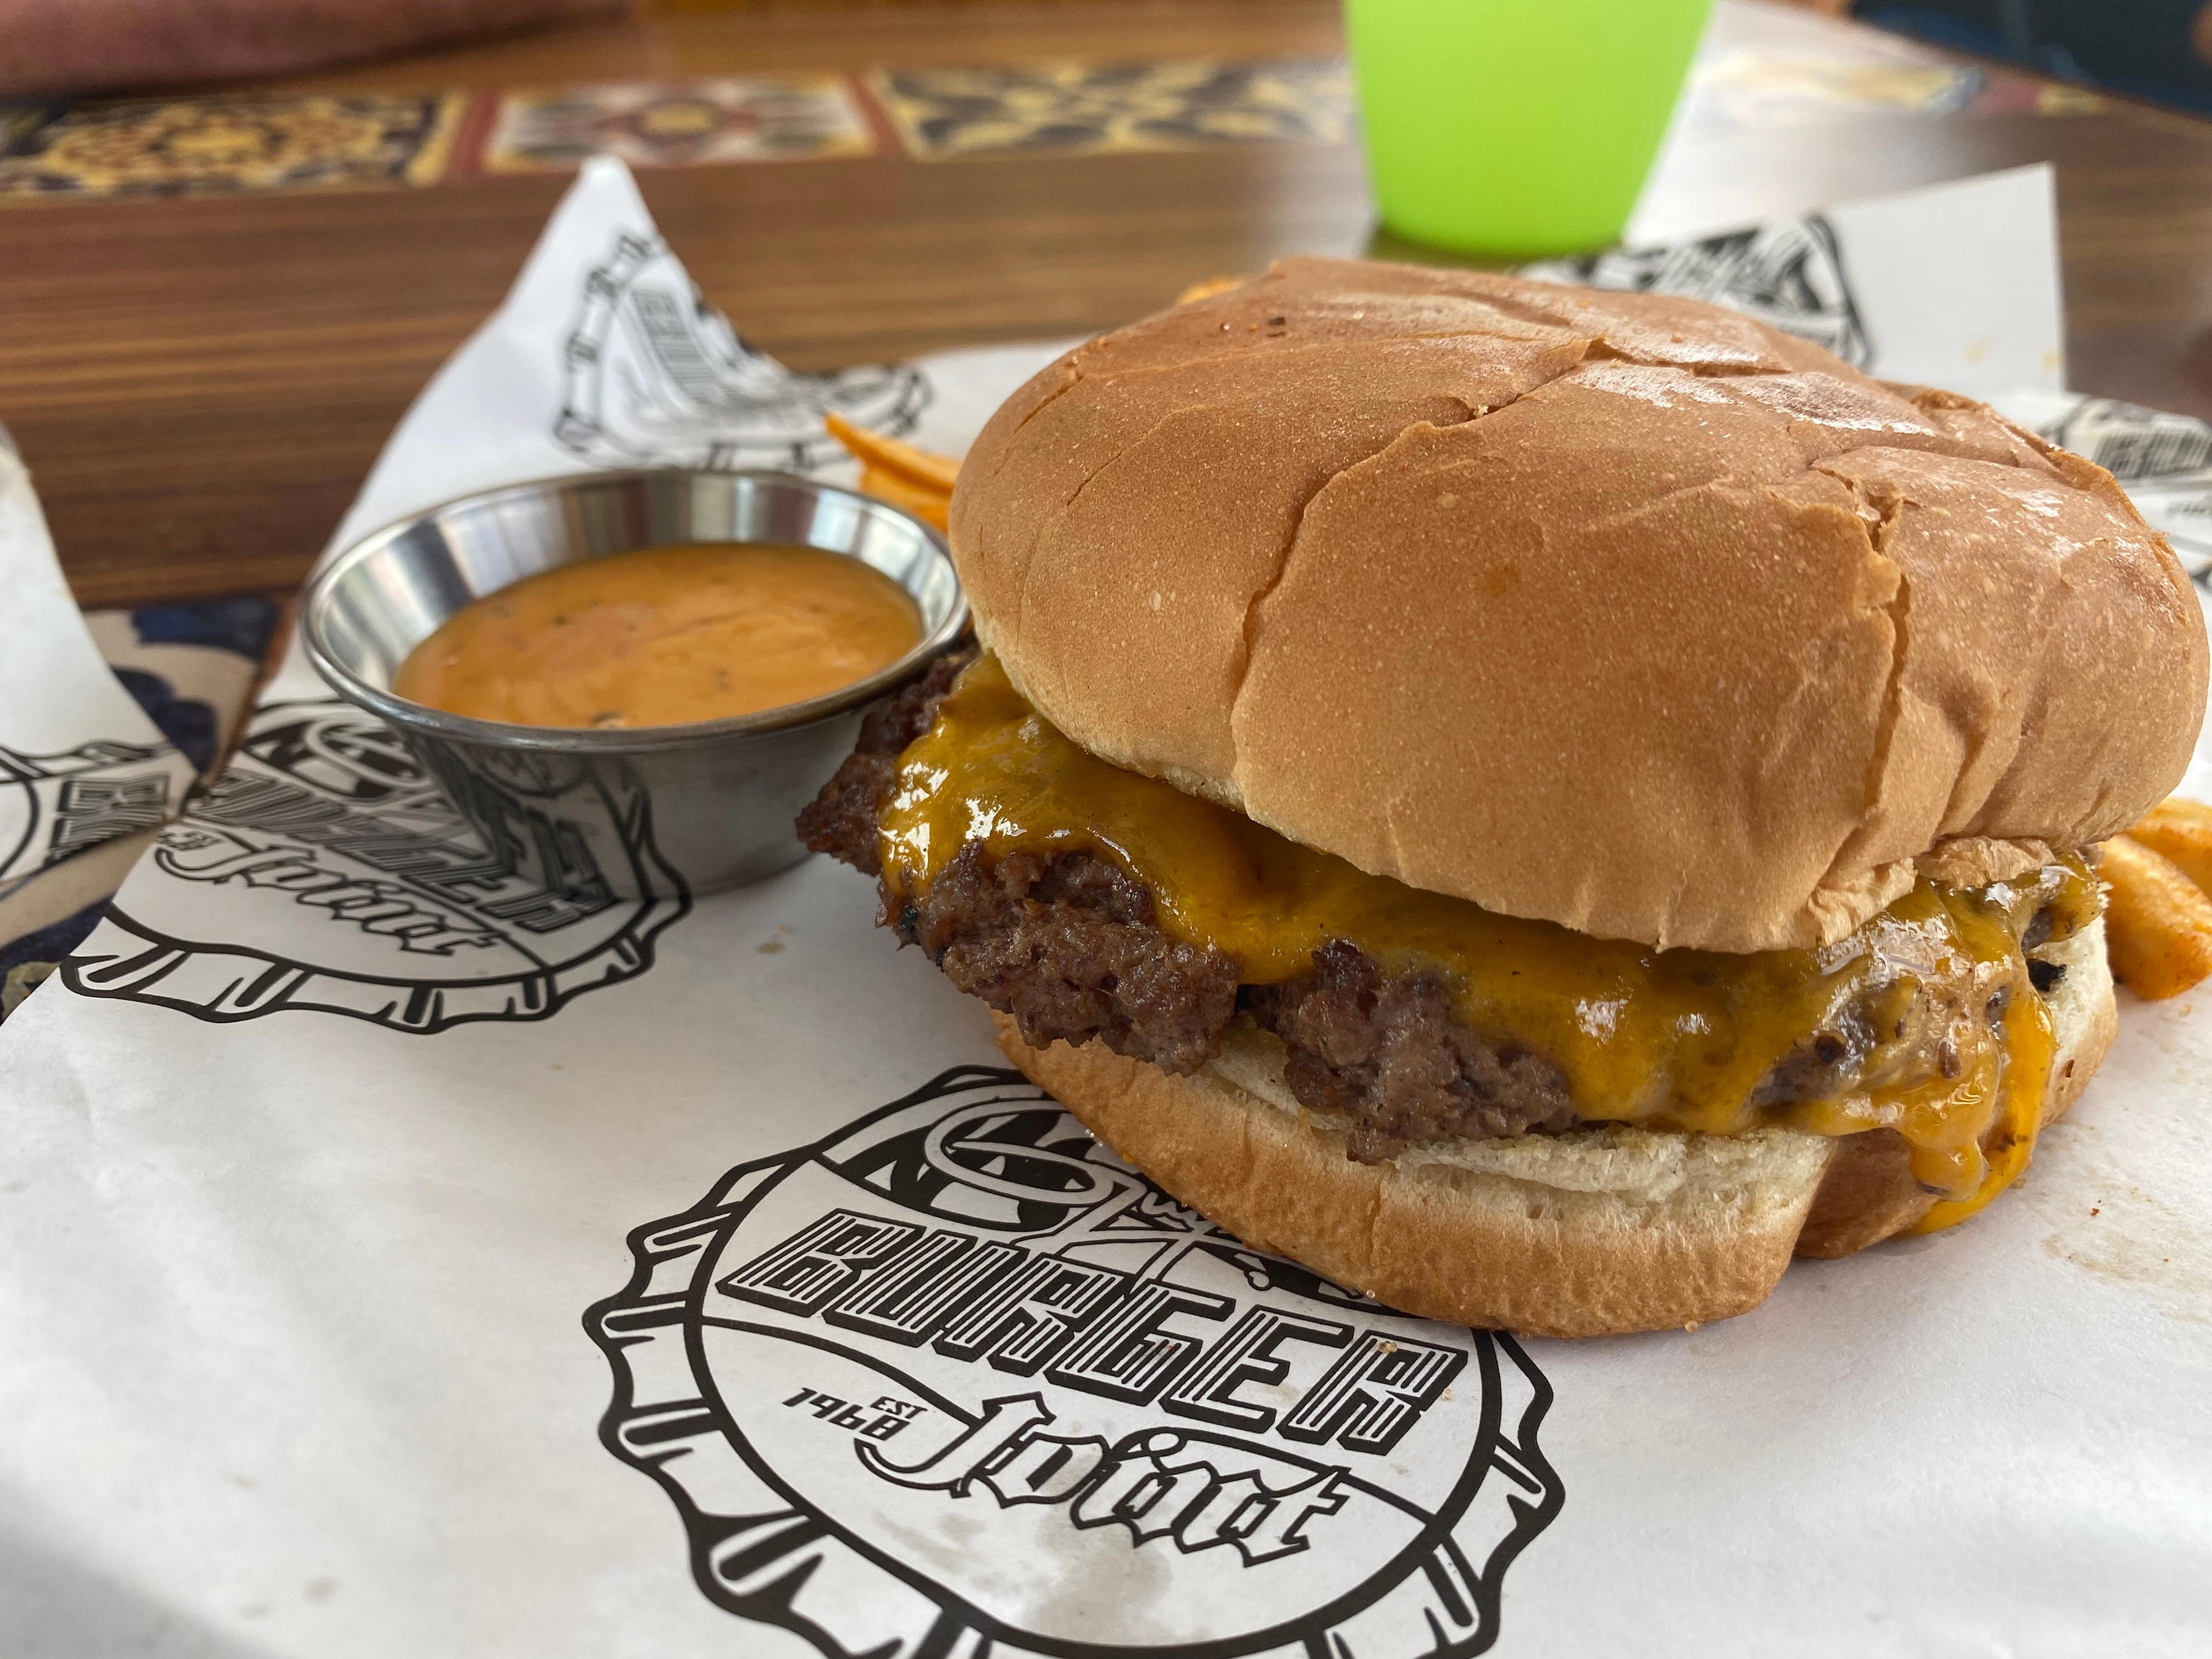 <p>The Plain Jane, a <a href="https://www.businessinsider.com/best-chain-hamburgers-according-to-chefs-2018-11">grilled patty on a bun</a>, was the item I heard ordered most frequently in line. I got mine with cheese, but it can also be ordered with just a patty as well. </p><p>It was a great option for kids who don't want a lot of extra dressing on their burgers. Personally, I wanted a bit more flavor, so I dipped the Plain Jane into some chipotle mayo.</p>